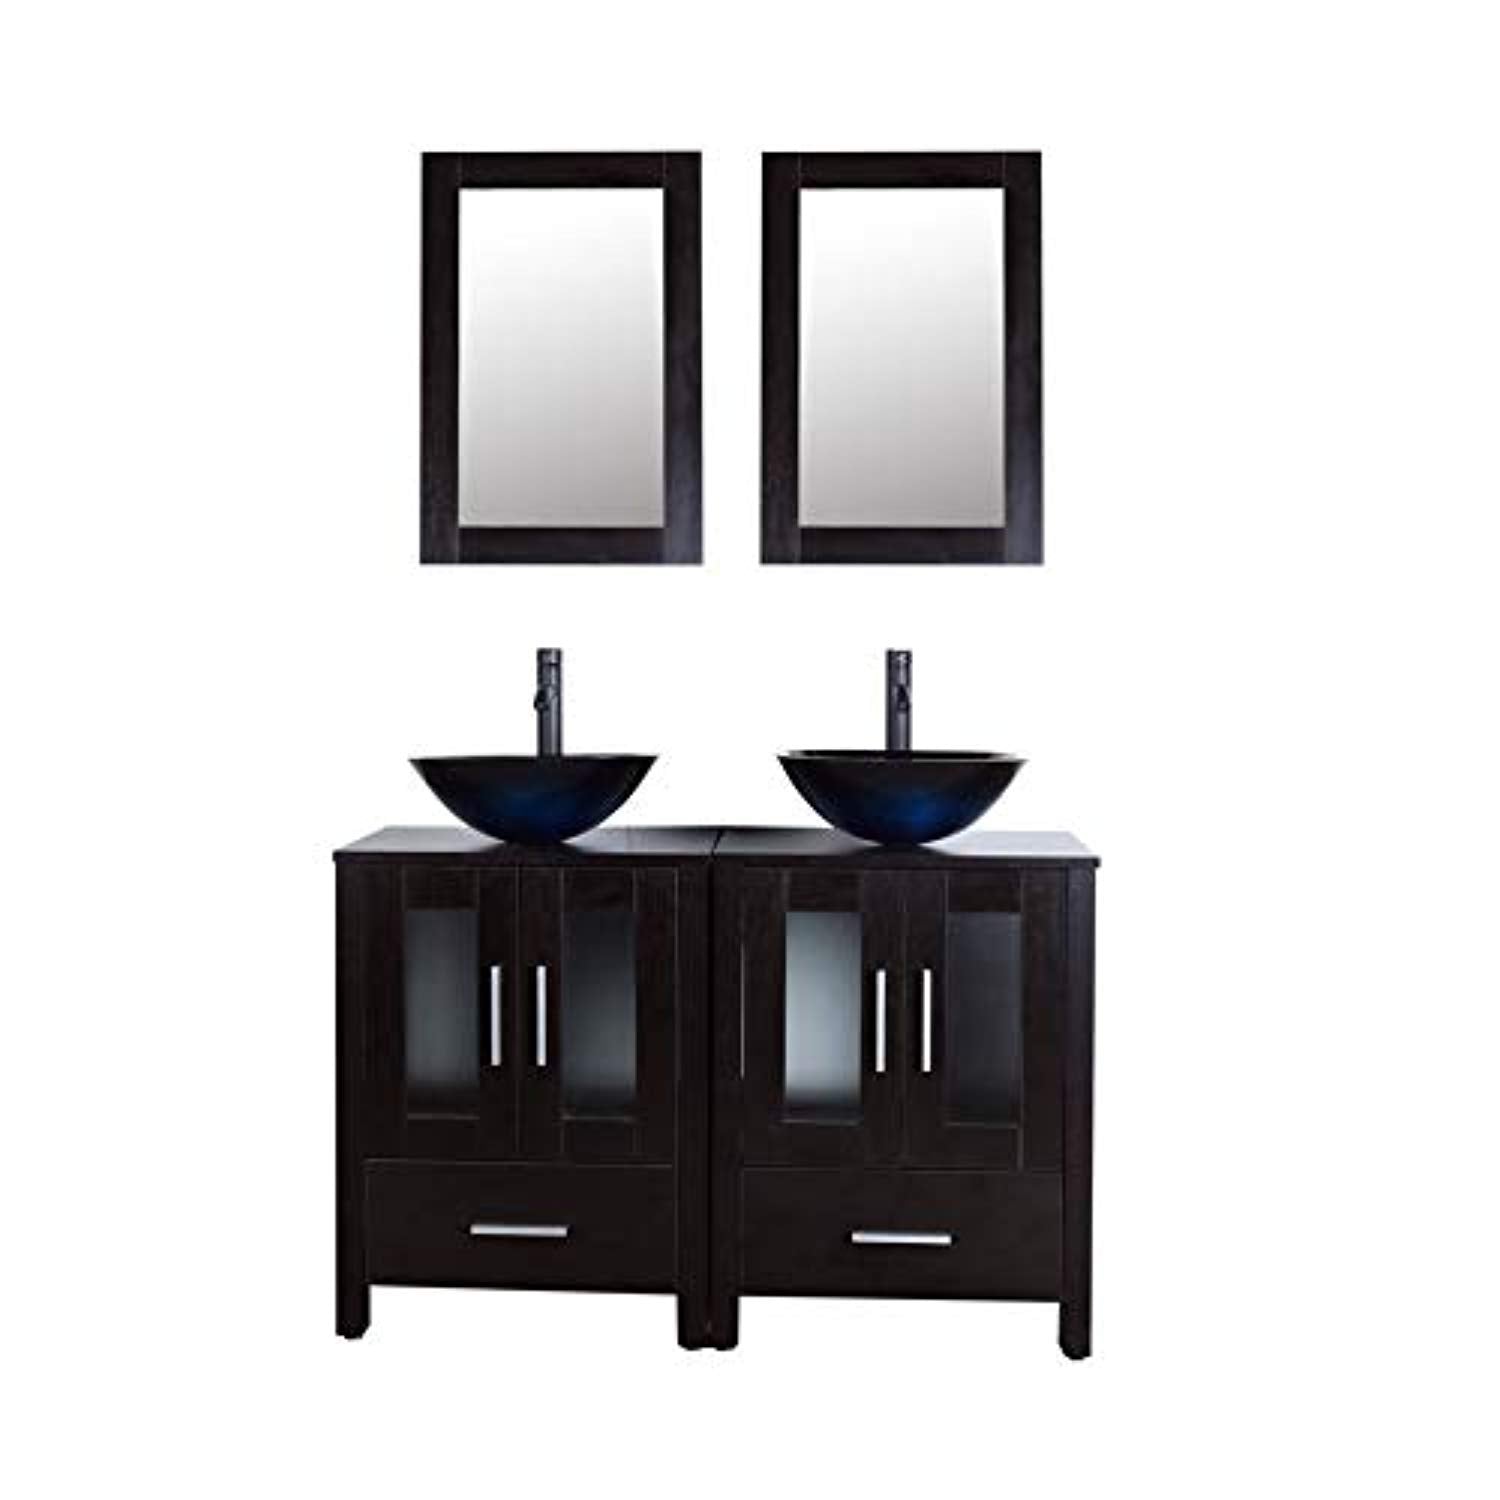 48 Black Bathroom Vanity Cabinet Double Sink Combo W Mirror Faucet And Drain Glass Sink